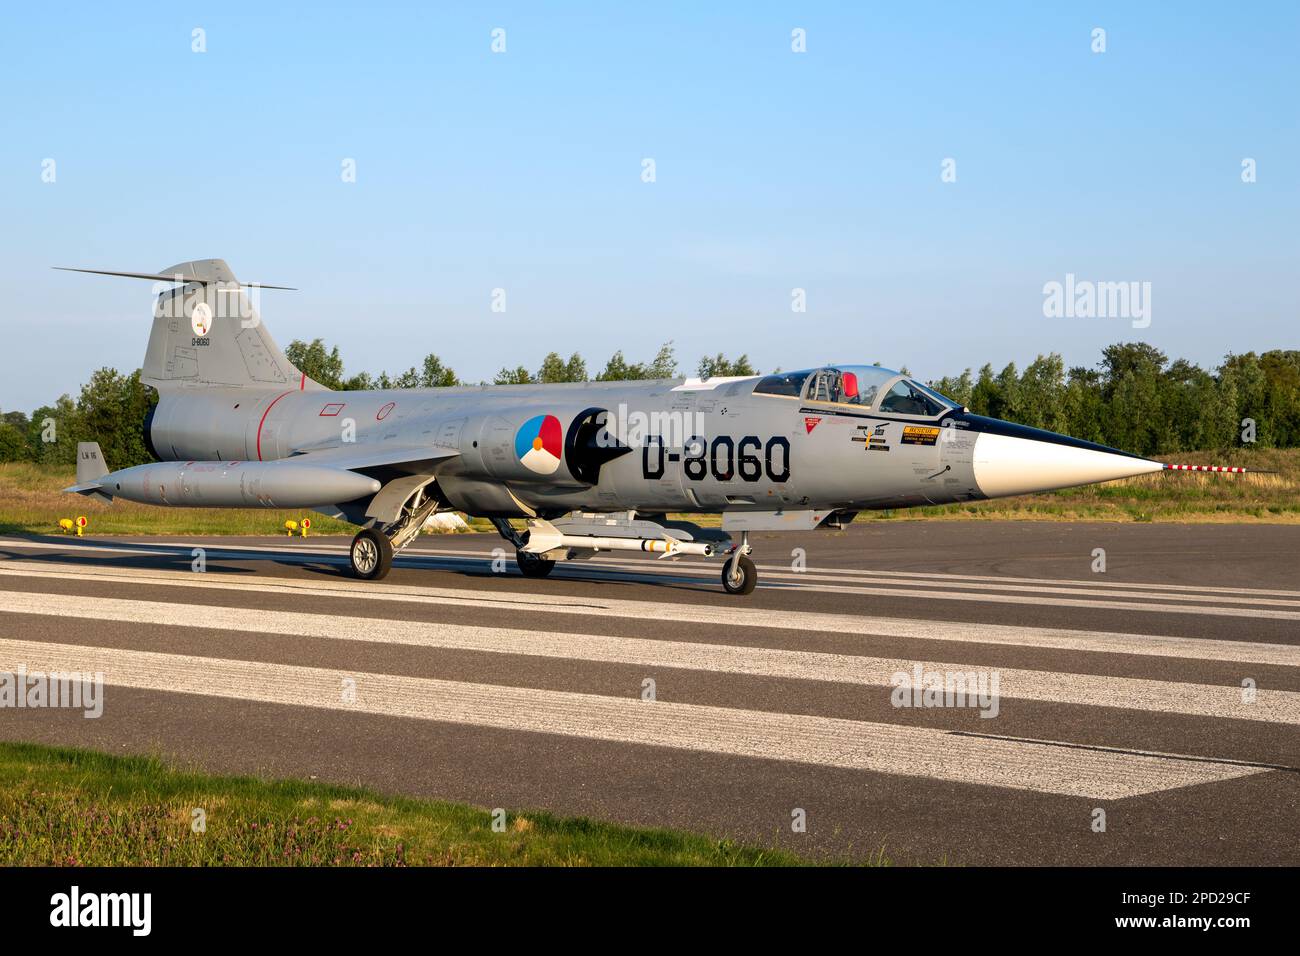 Former Royal Netherlands Air Force Lockheed F-104G Starfighter fighter jet on the runway of Teuge Airport. Teuge, The Netherlands - June 4, 2022 Stock Photo